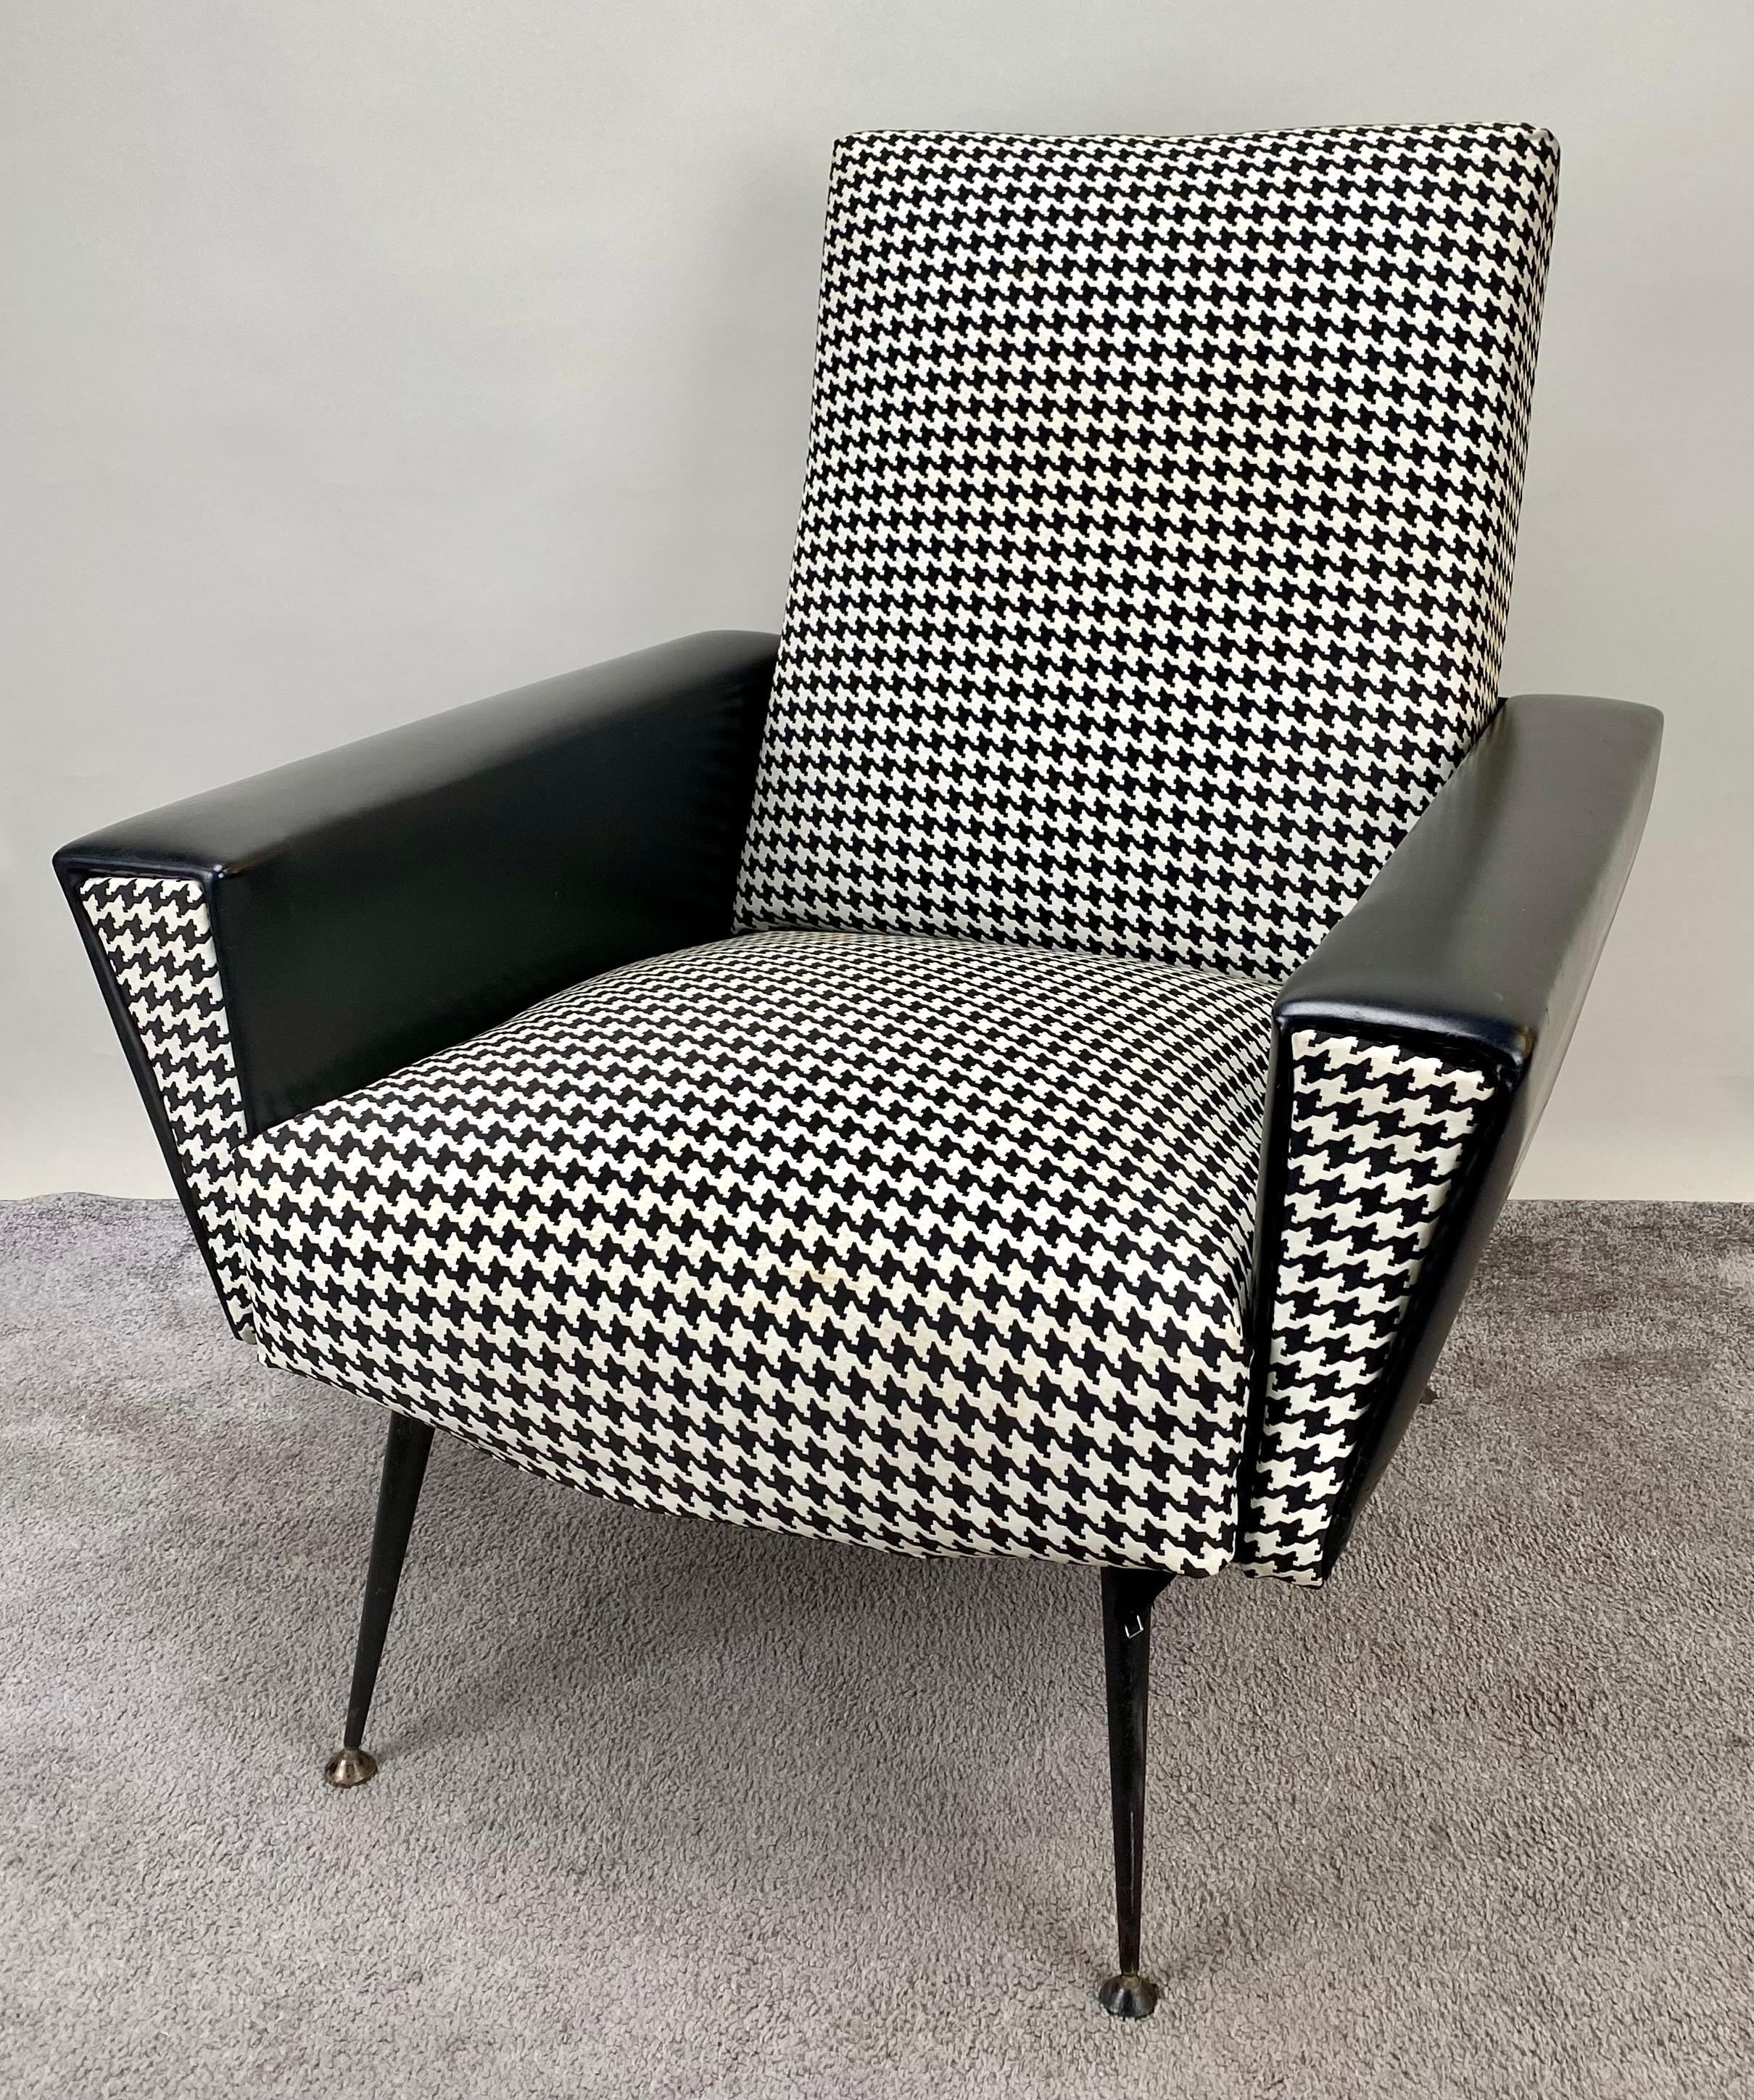 Mid-20th Century Mid-Century Modern Armchair or Lounge Chair Black and White, 1960s For Sale